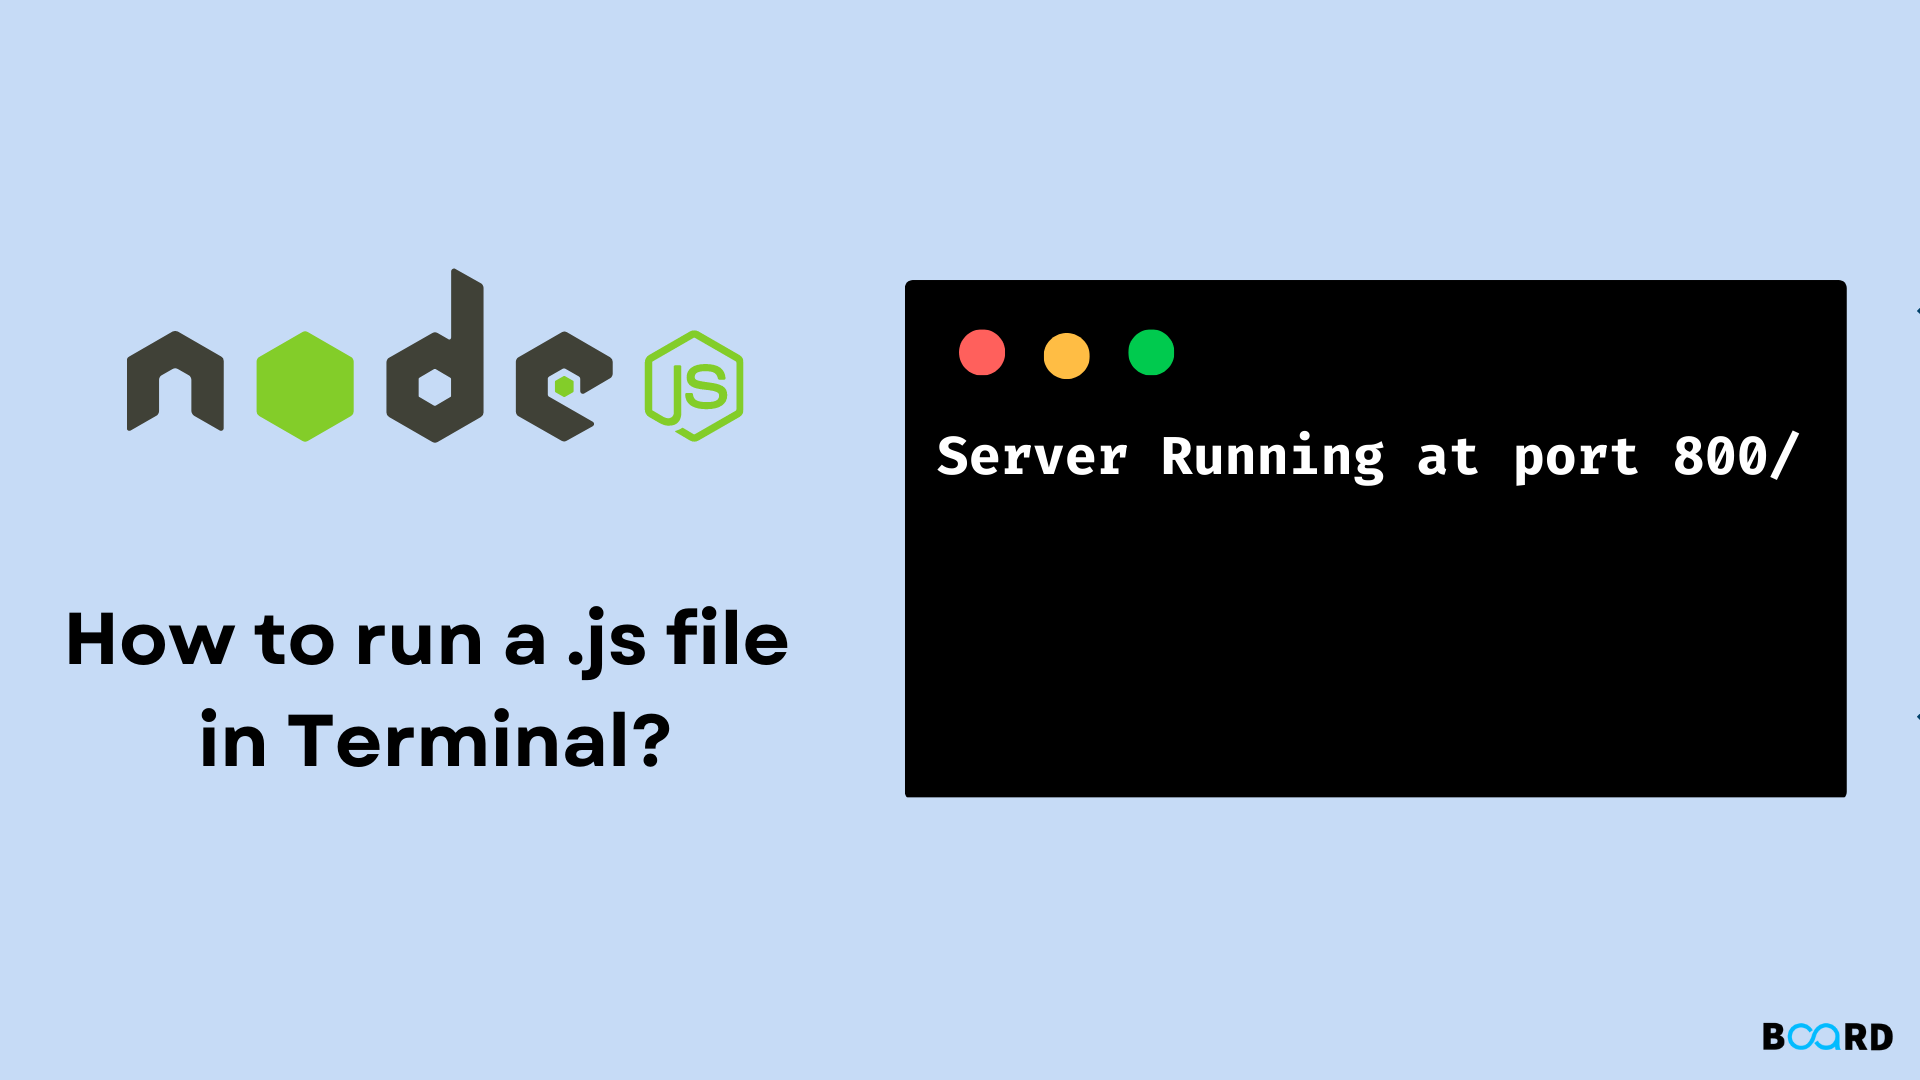 How to run a .js file in Terminal?